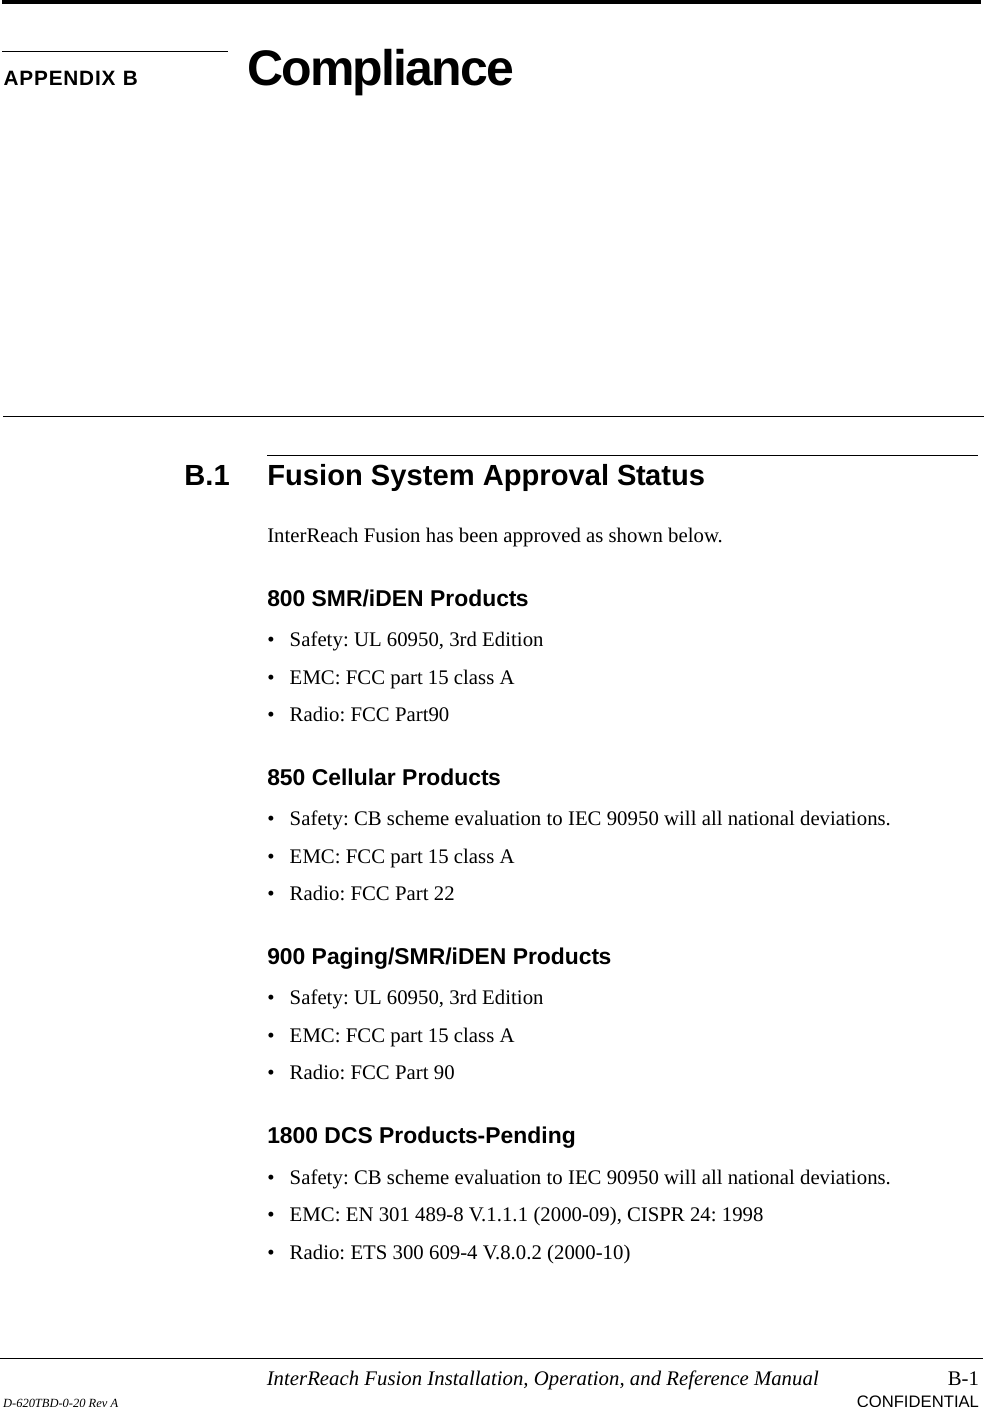 InterReach Fusion Installation, Operation, and Reference Manual B-1D-620TBD-0-20 Rev A CONFIDENTIALAPPENDIX B ComplianceB.1 Fusion System Approval StatusInterReach Fusion has been approved as shown below.800 SMR/iDEN Products• Safety: UL 60950, 3rd Edition• EMC: FCC part 15 class A• Radio: FCC Part90850 Cellular Products• Safety: CB scheme evaluation to IEC 90950 will all national deviations.• EMC: FCC part 15 class A• Radio: FCC Part 22900 Paging/SMR/iDEN Products• Safety: UL 60950, 3rd Edition• EMC: FCC part 15 class A• Radio: FCC Part 901800 DCS Products-Pending• Safety: CB scheme evaluation to IEC 90950 will all national deviations.• EMC: EN 301 489-8 V.1.1.1 (2000-09), CISPR 24: 1998• Radio: ETS 300 609-4 V.8.0.2 (2000-10)